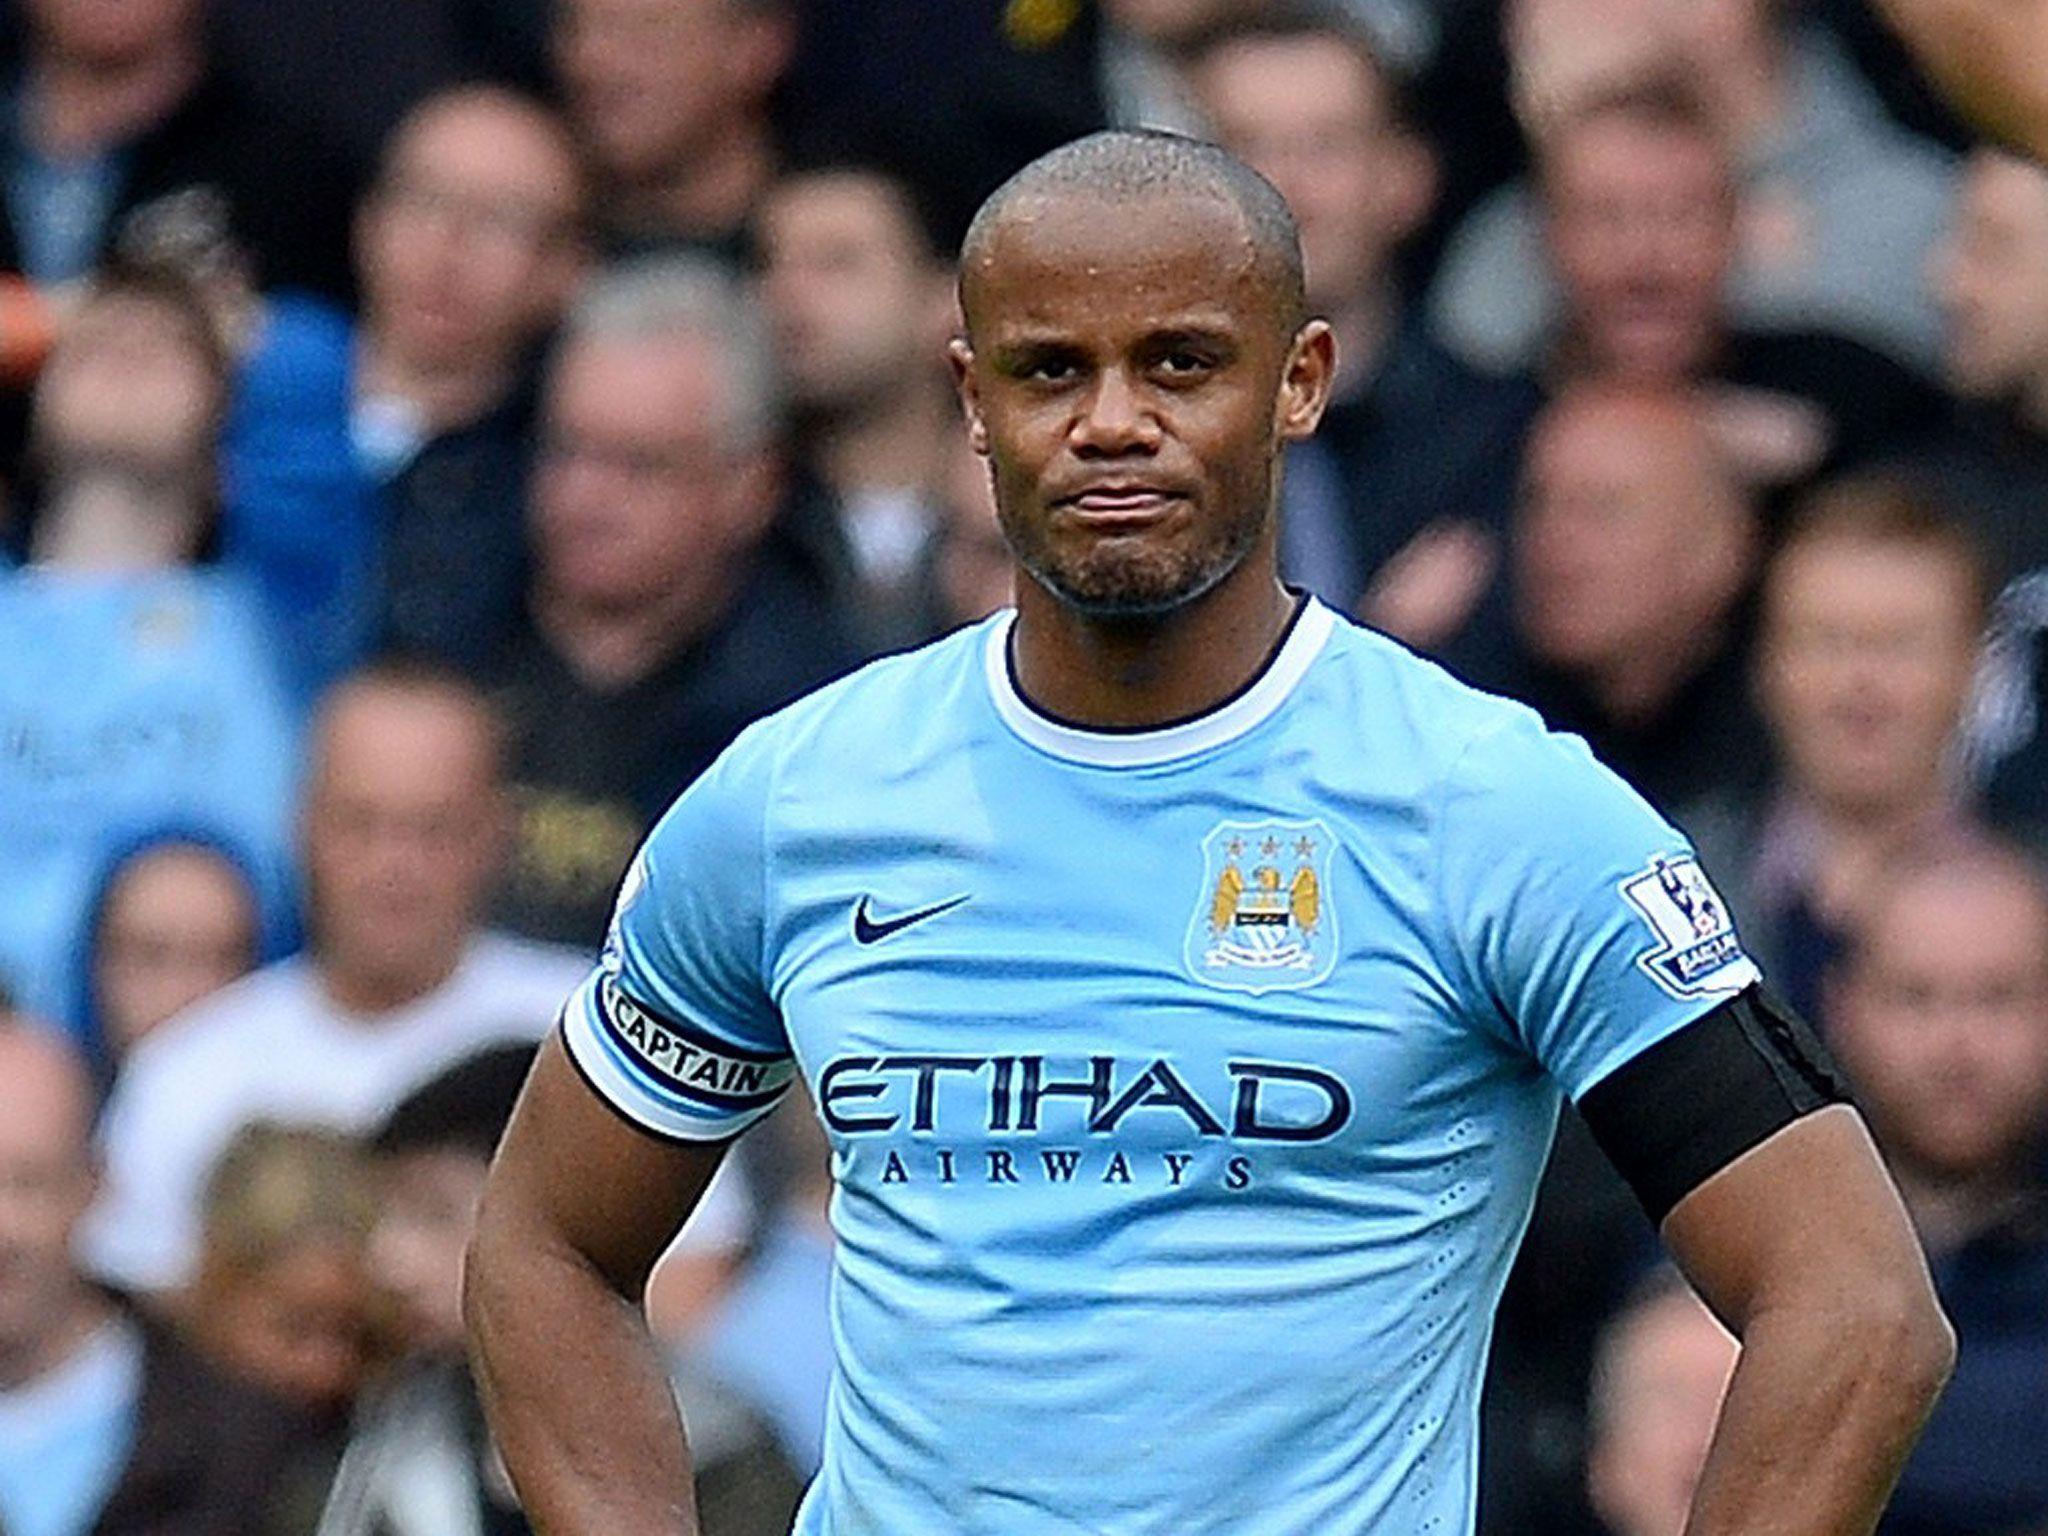 Comment: Vincent Kompany and Manchester City lack the recipe